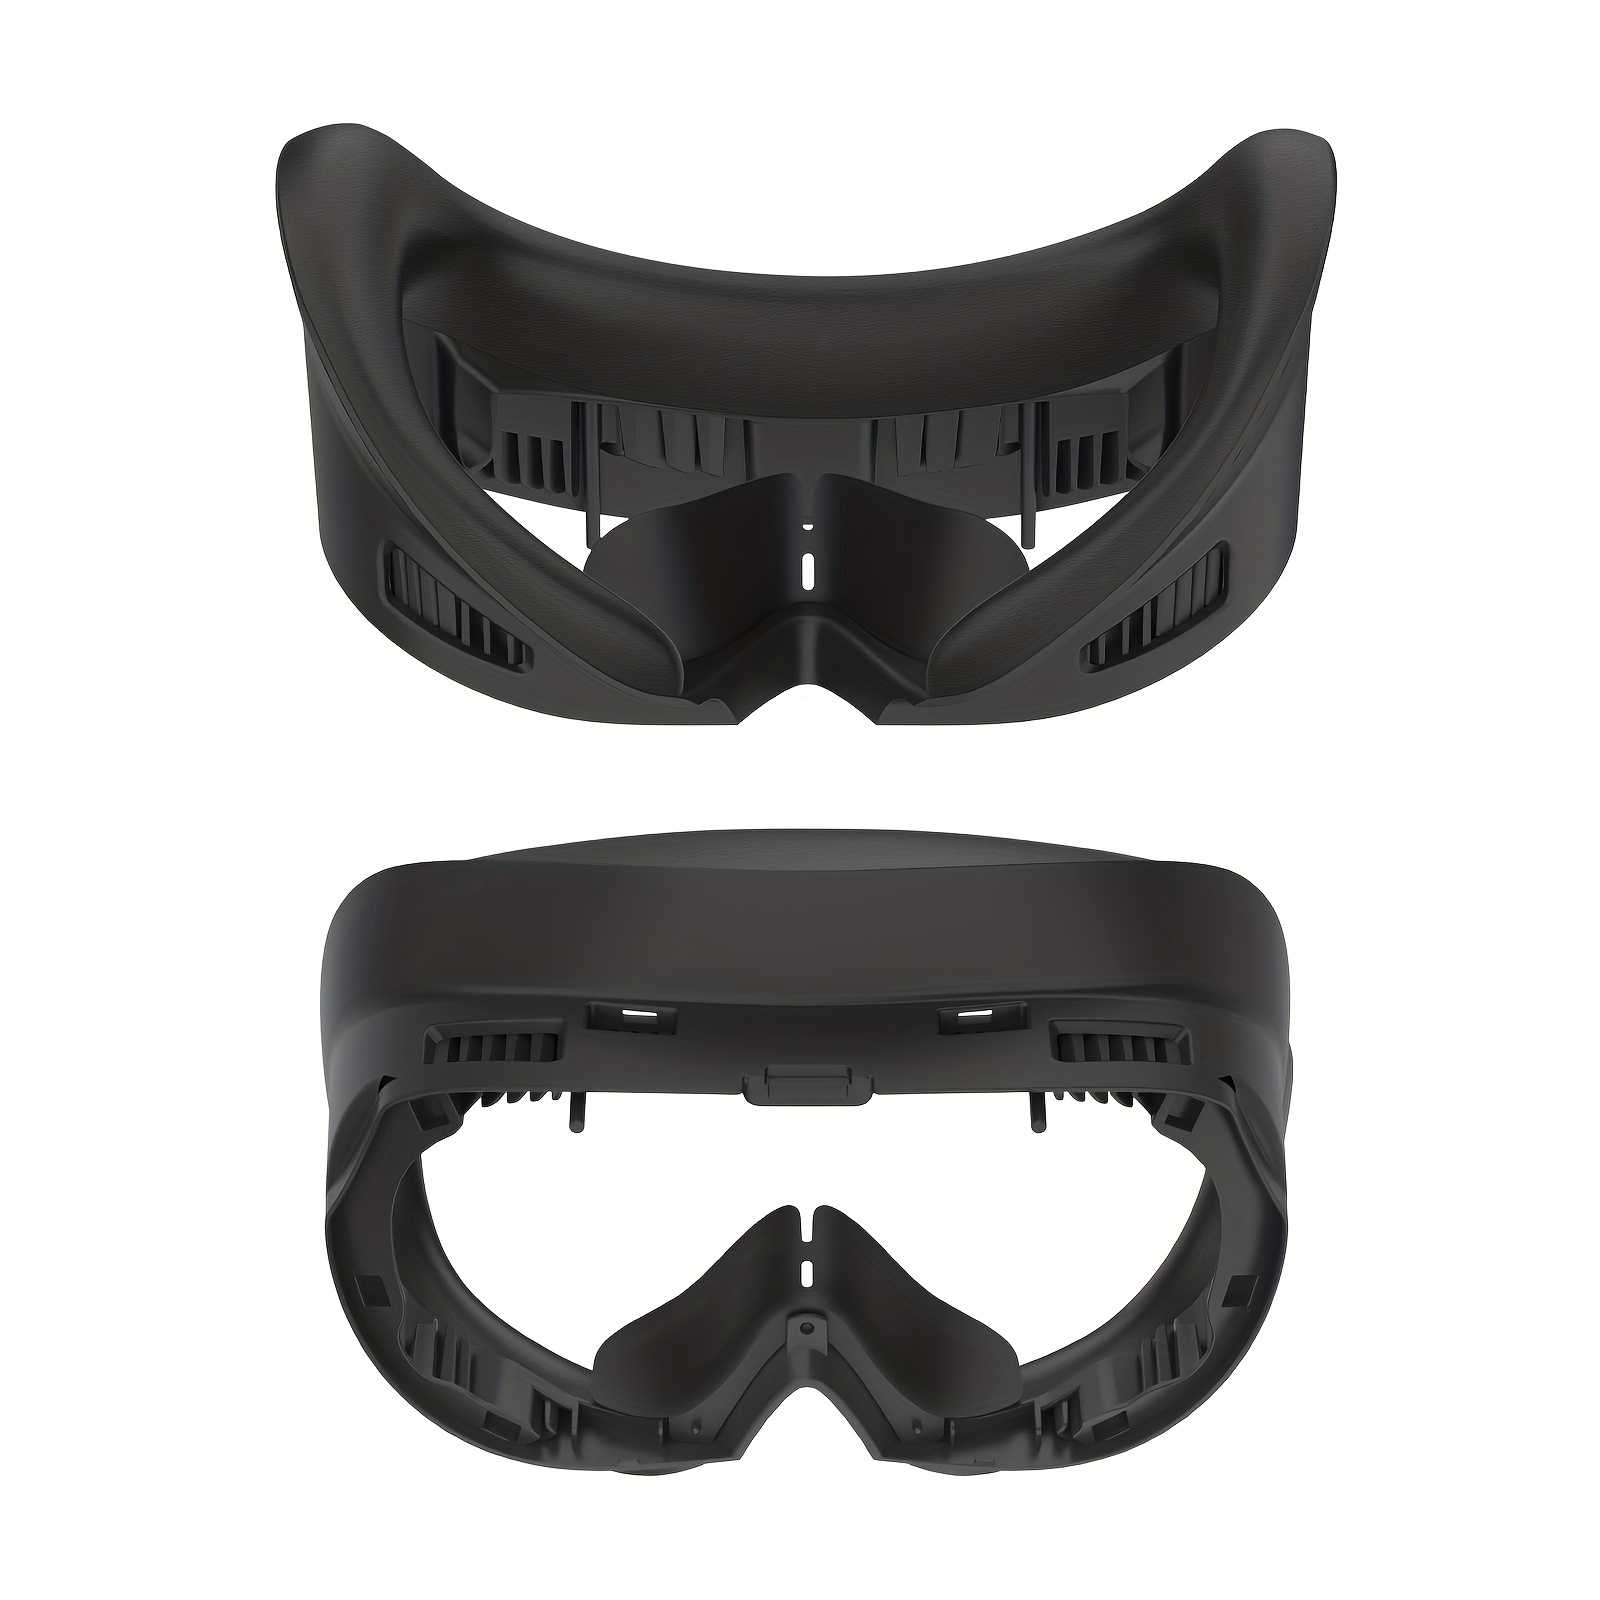 Protective shell for Pico 4 VR Headset. Express delivery